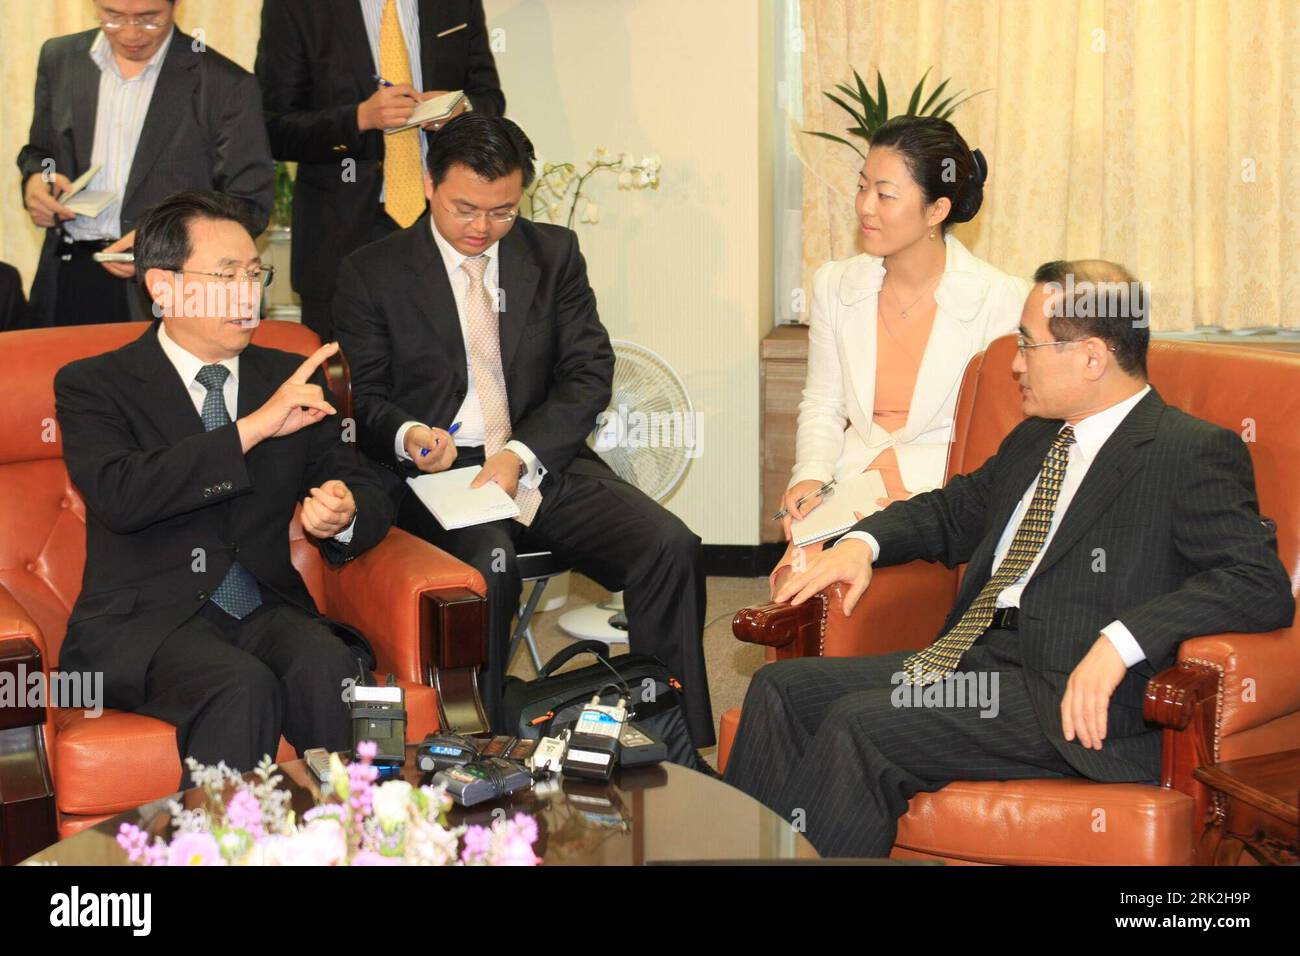 Bildnummer: 53194510  Datum: 13.07.2009  Copyright: imago/Xinhua (090713) -- SEOUL, July 13, 2009 (Xinhua) -- Visiting Chinese Vice Foreign Minister Wu Dawei (Front, L) talks with Wi Sung-lac (Front, R), South Korean special representative for Korean Peninsula peace and security affairs, during their meet in Seoul, capital of South Korea, on July 13, 2009.      (Xinhua/Ji Xinlong)  (lr) (2)SOUTH KOREA-SEOUL-WU DAWEI-WI SUNG-LAC-MEET  PUBLICATIONxNOTxINxCHN  People Politik premiumd kbdig xub  2009 quer Außenminister Pressetermin    Bildnummer 53194510 Date 13 07 2009 Copyright Imago XINHUA 0907 Stock Photo